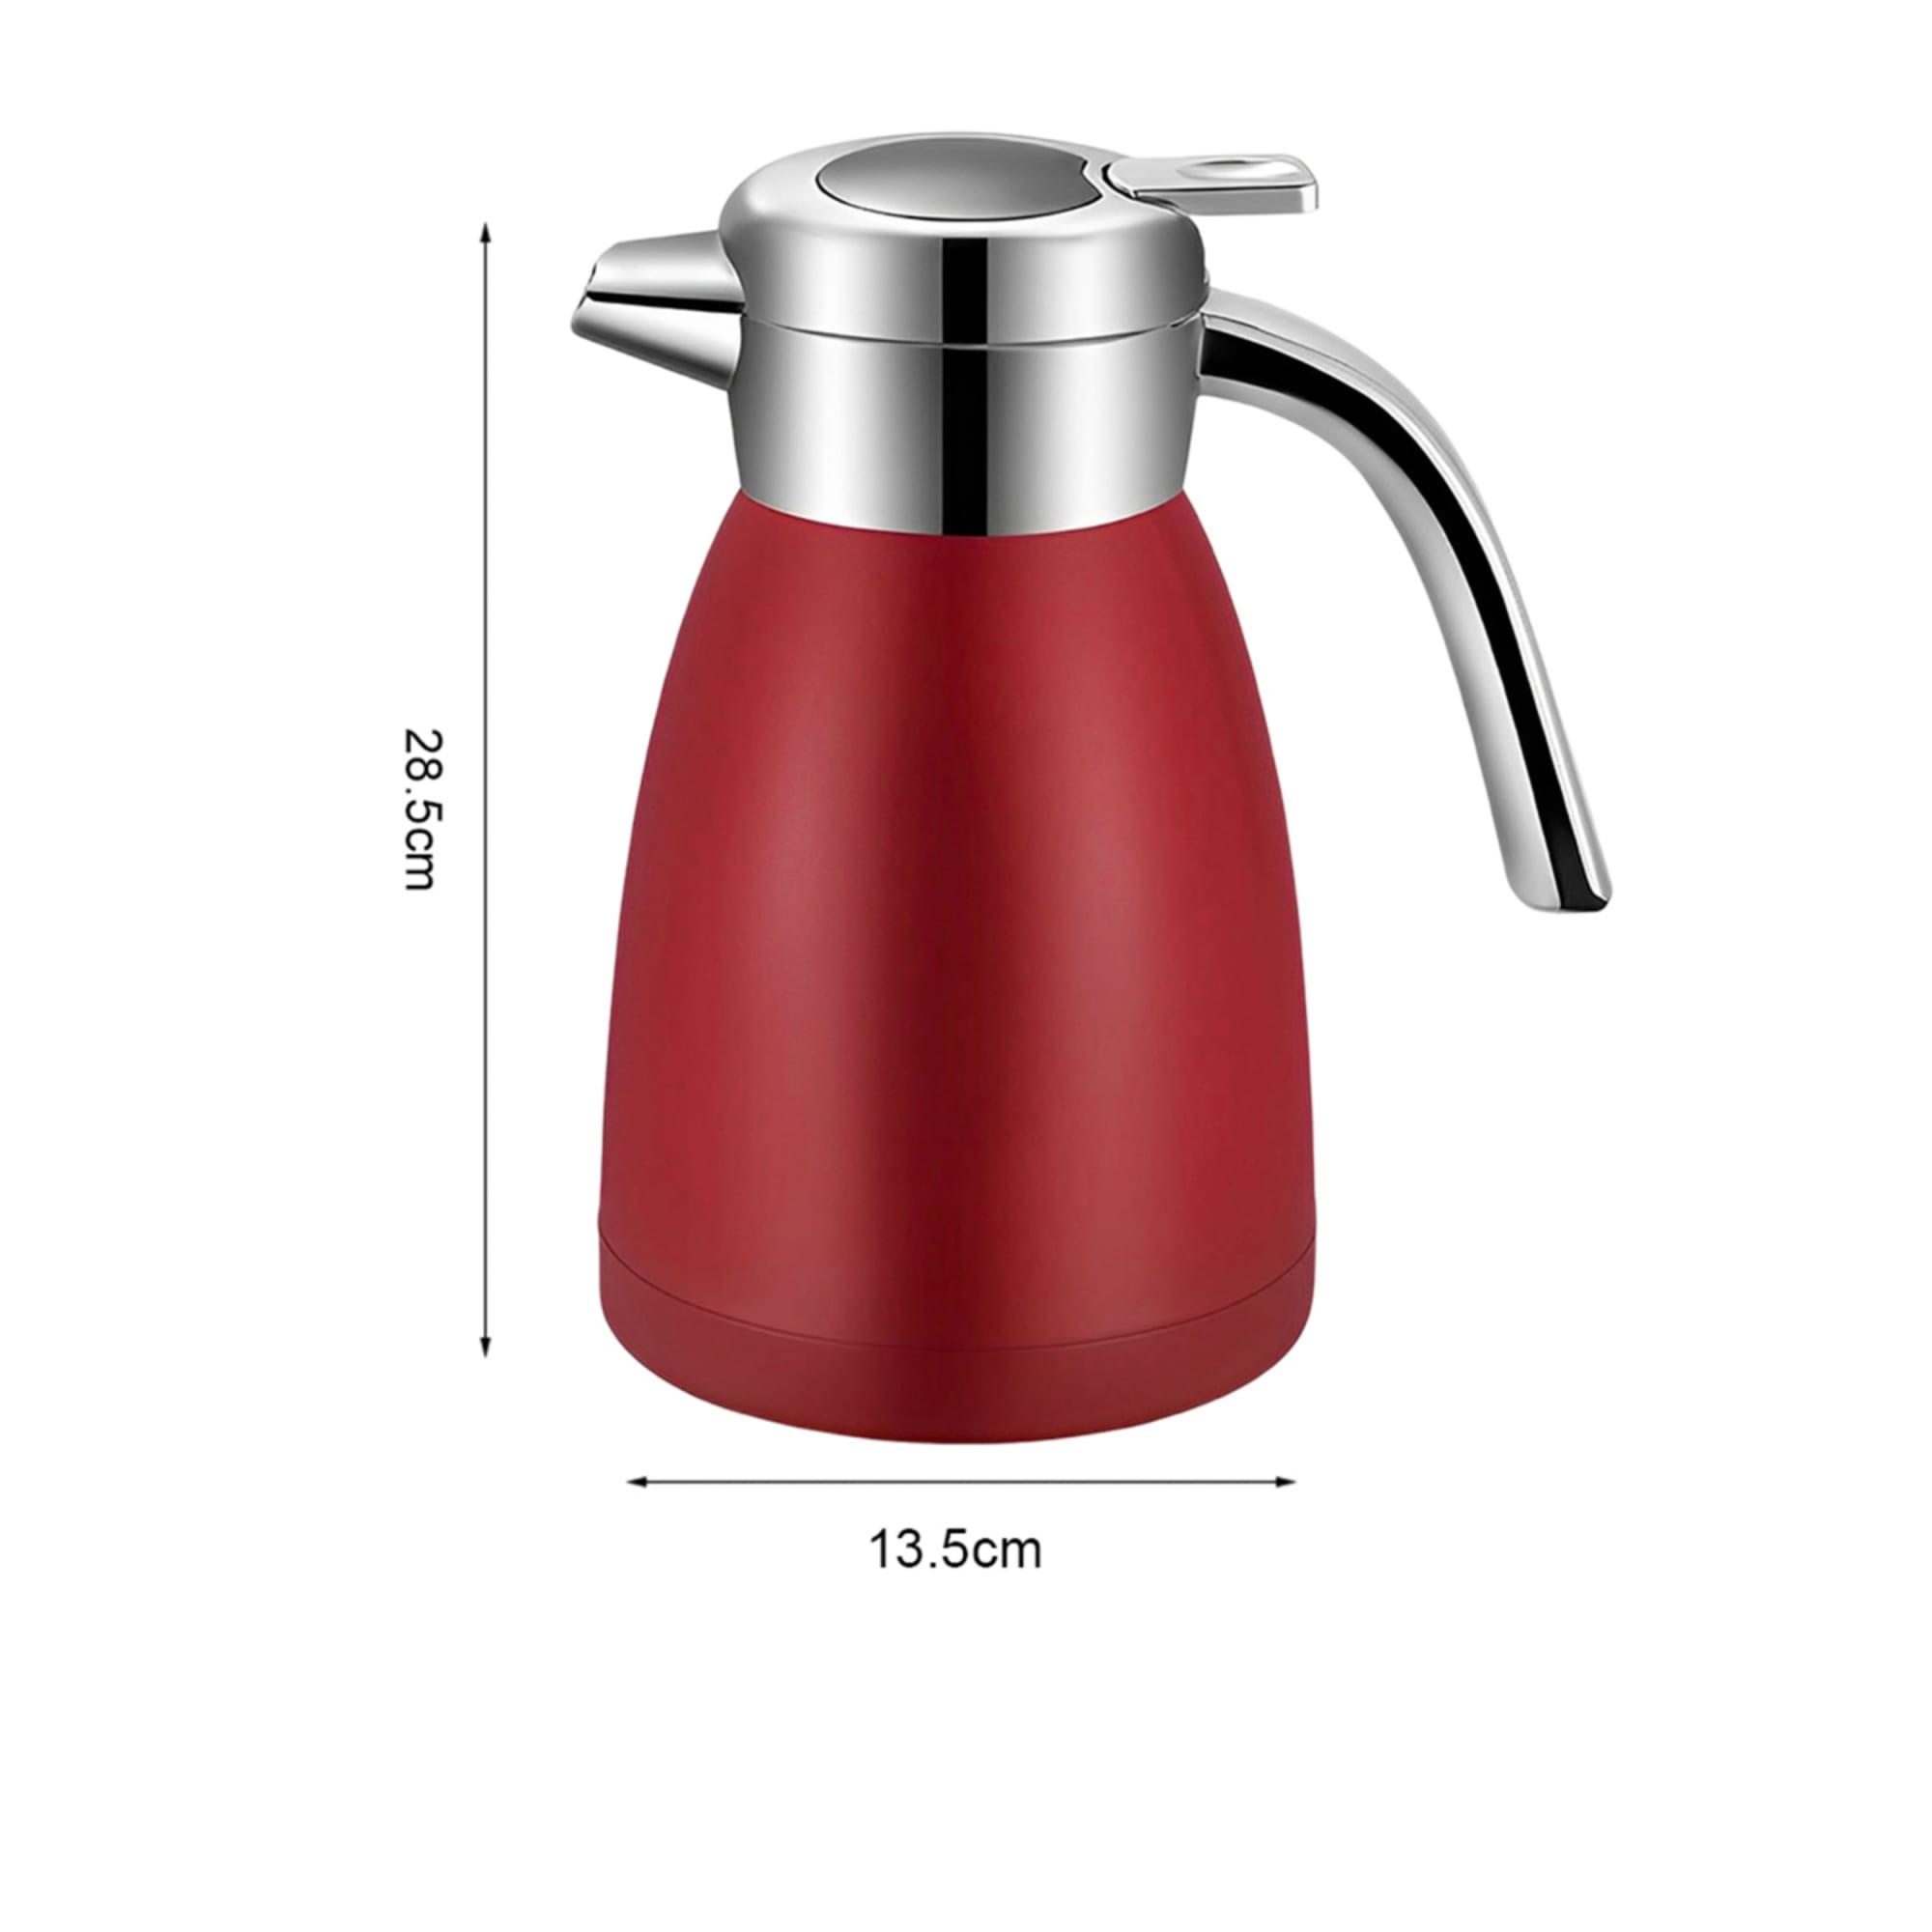 Soga Stainless Steel Insulated Kettle 2.2L Red Image 7